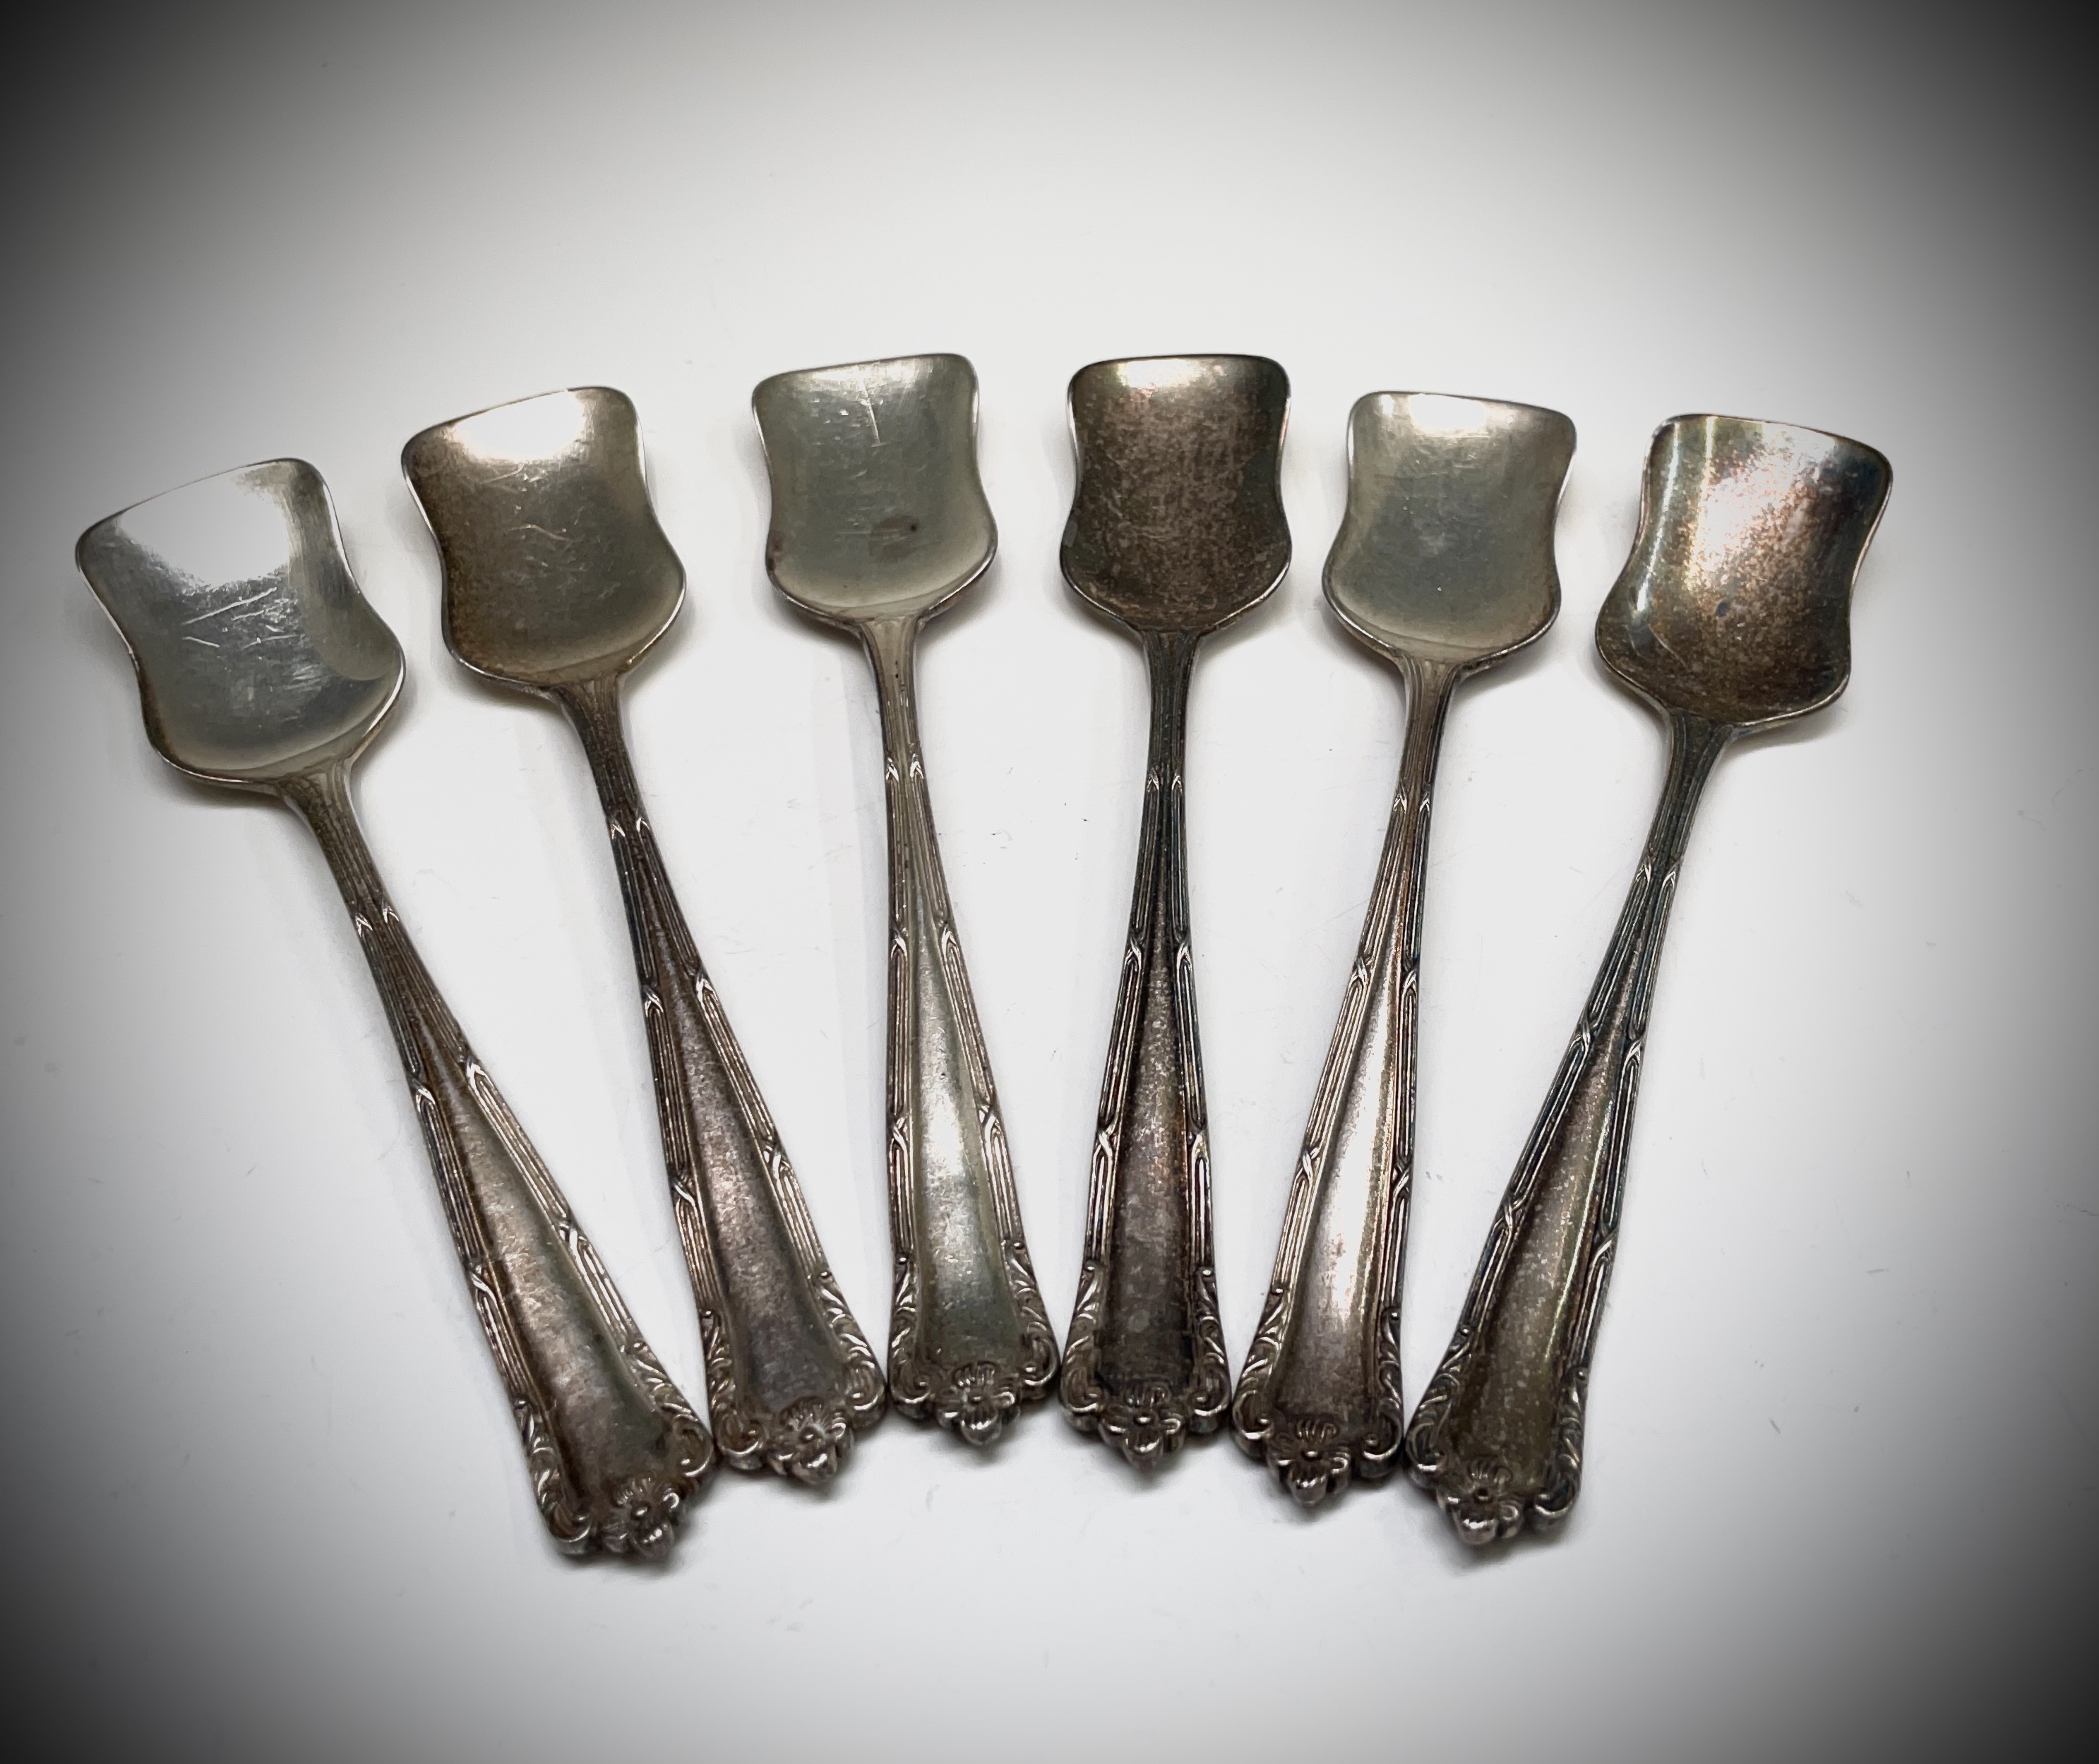 Six sugar shovel spoons. Stamped 'silver' 164.3 gm. Condition: Tarnishing, no serious condition